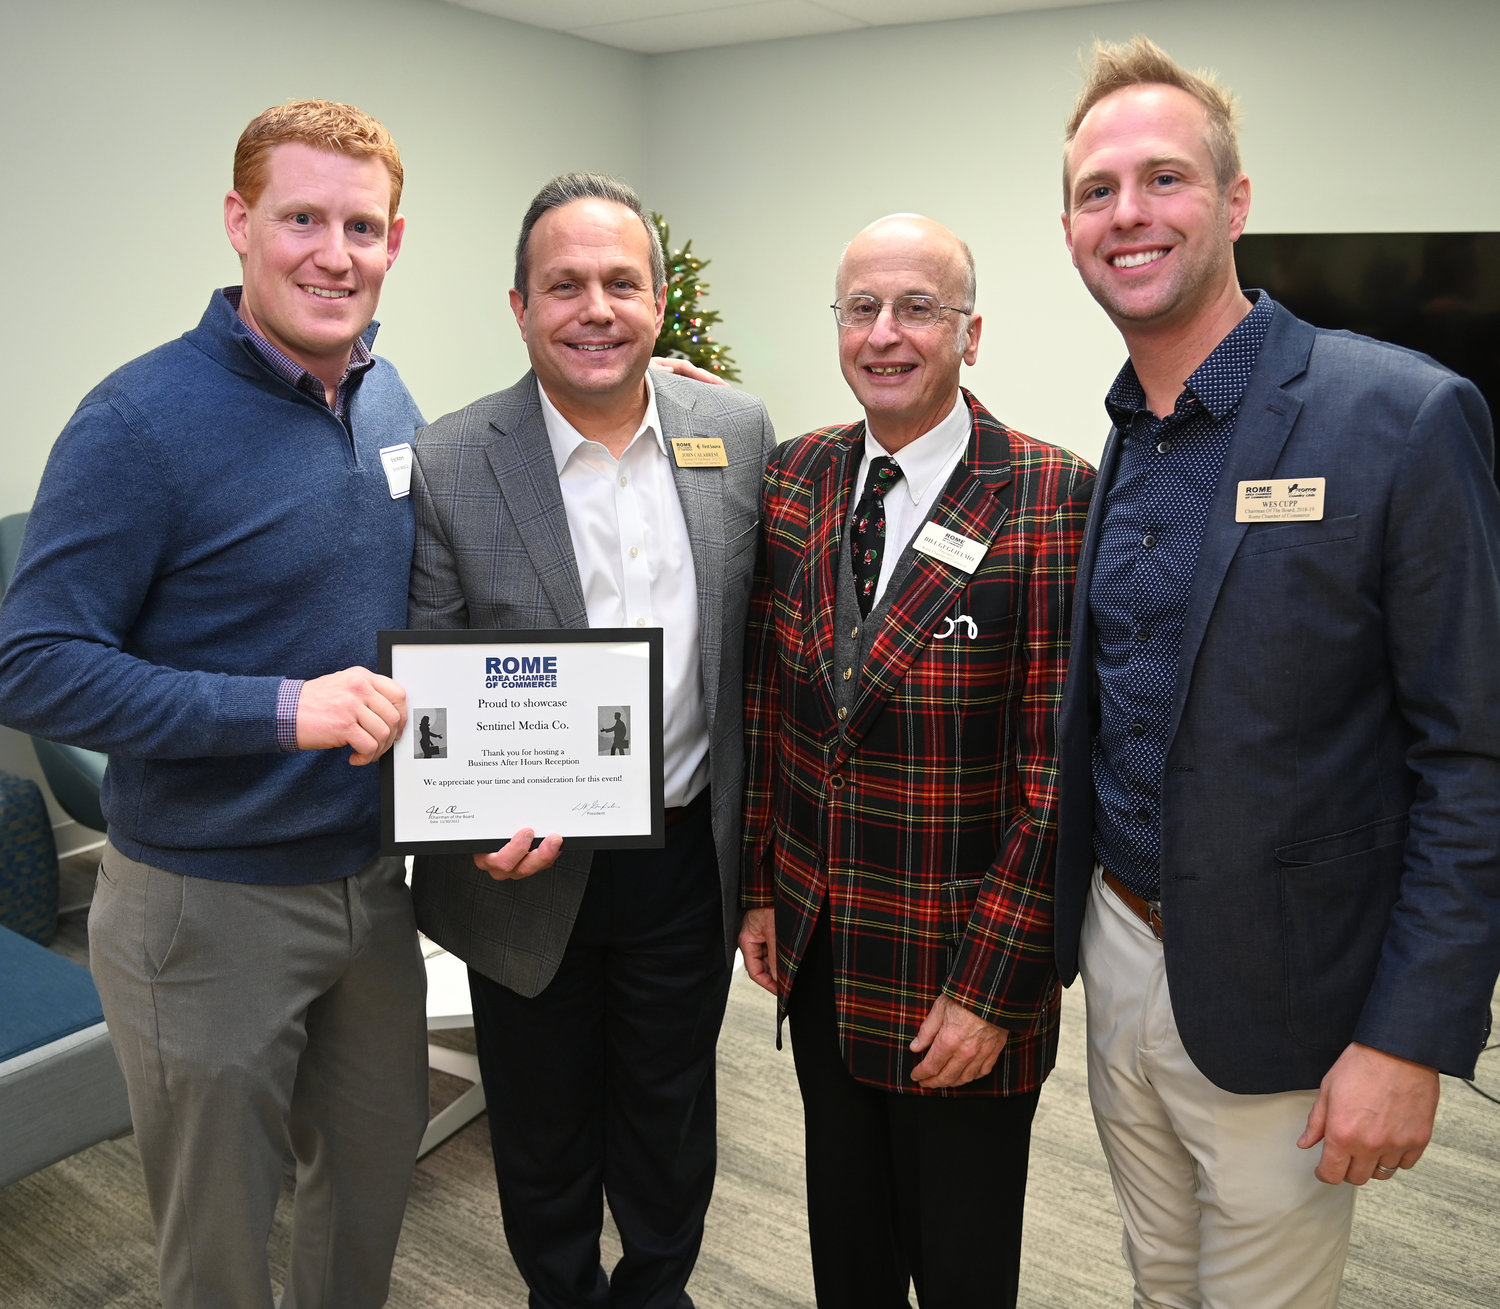 One of Bill Guglielmo’s last official public appearances was to present an award to the Daily Sentinel at a Business After Hours event in November 2022. From left: Sentinel Media Co. President and Publisher Bradley R. Waters; John Calabrese, chairman of Rome Area Chamber of Commerce’s board of directors; Guglielmo; and Wesley Cupp, director of business development for the Sentinel Media Co. and interim president of the Rome Area Chamber of Commerce.